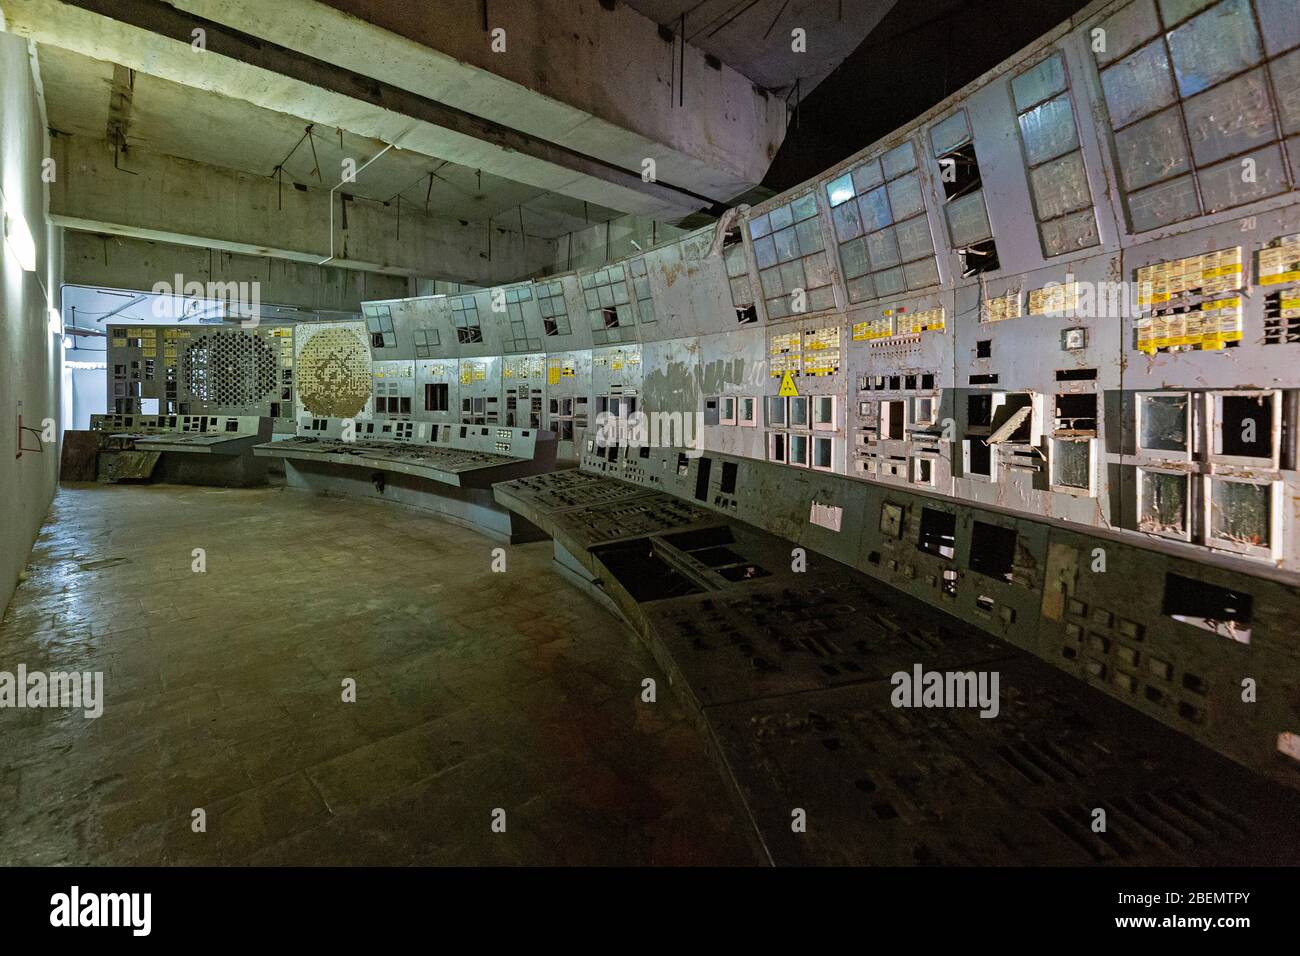 The October 19, 2019, the exploded Chernobyl nuclear reactor number 4 control (operations) room in Chernobyl Nuclear Power Plant in abandoned territor Stock Photo